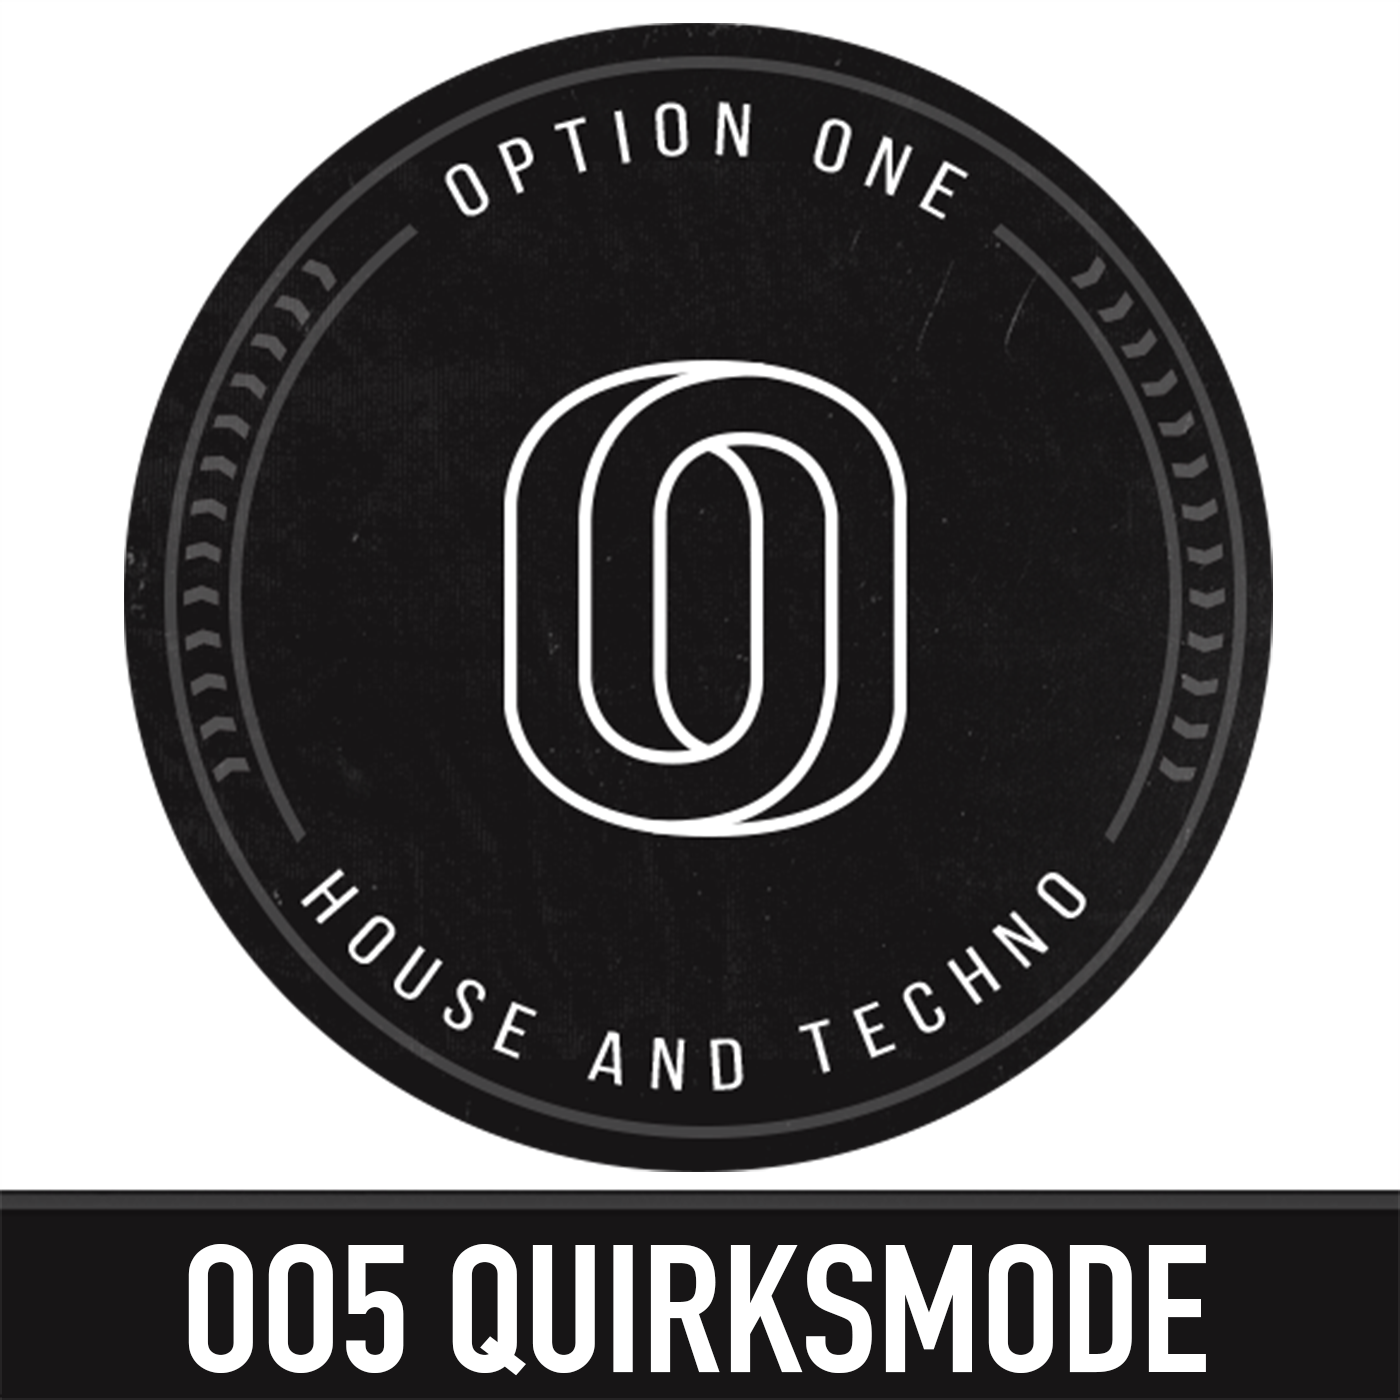 005 Quirksmode